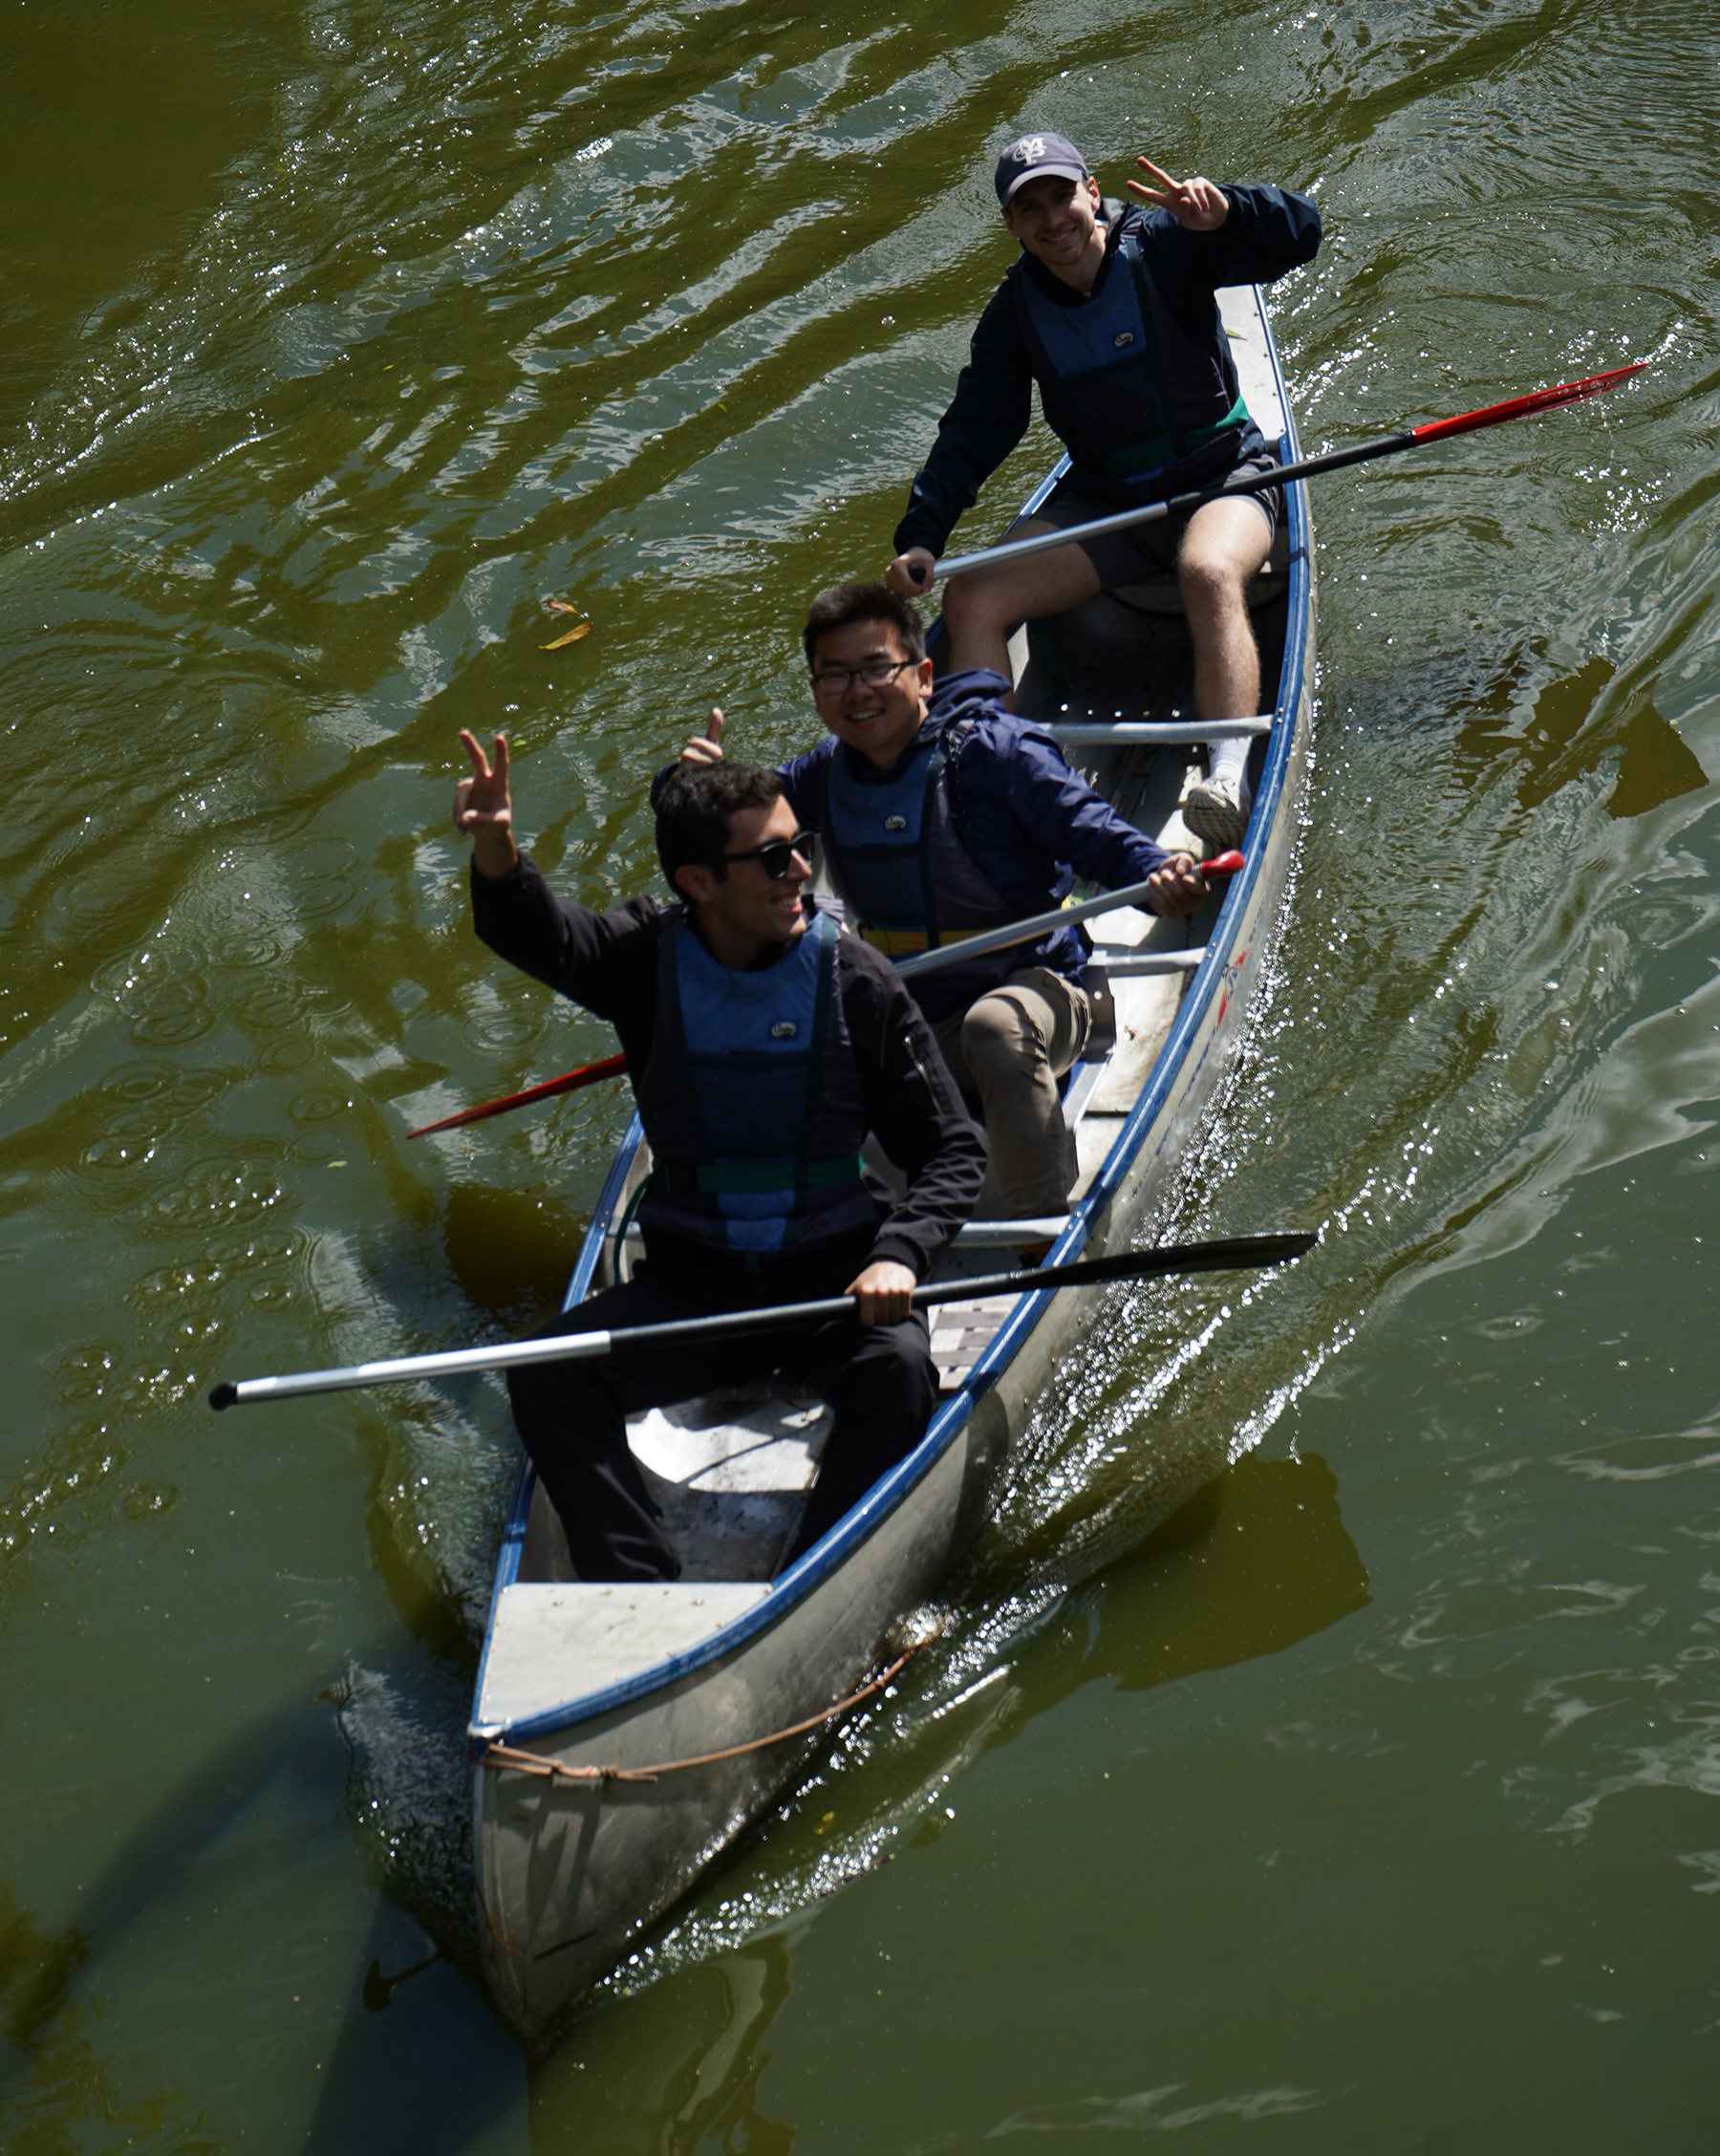 Bird's eye view of people canoing